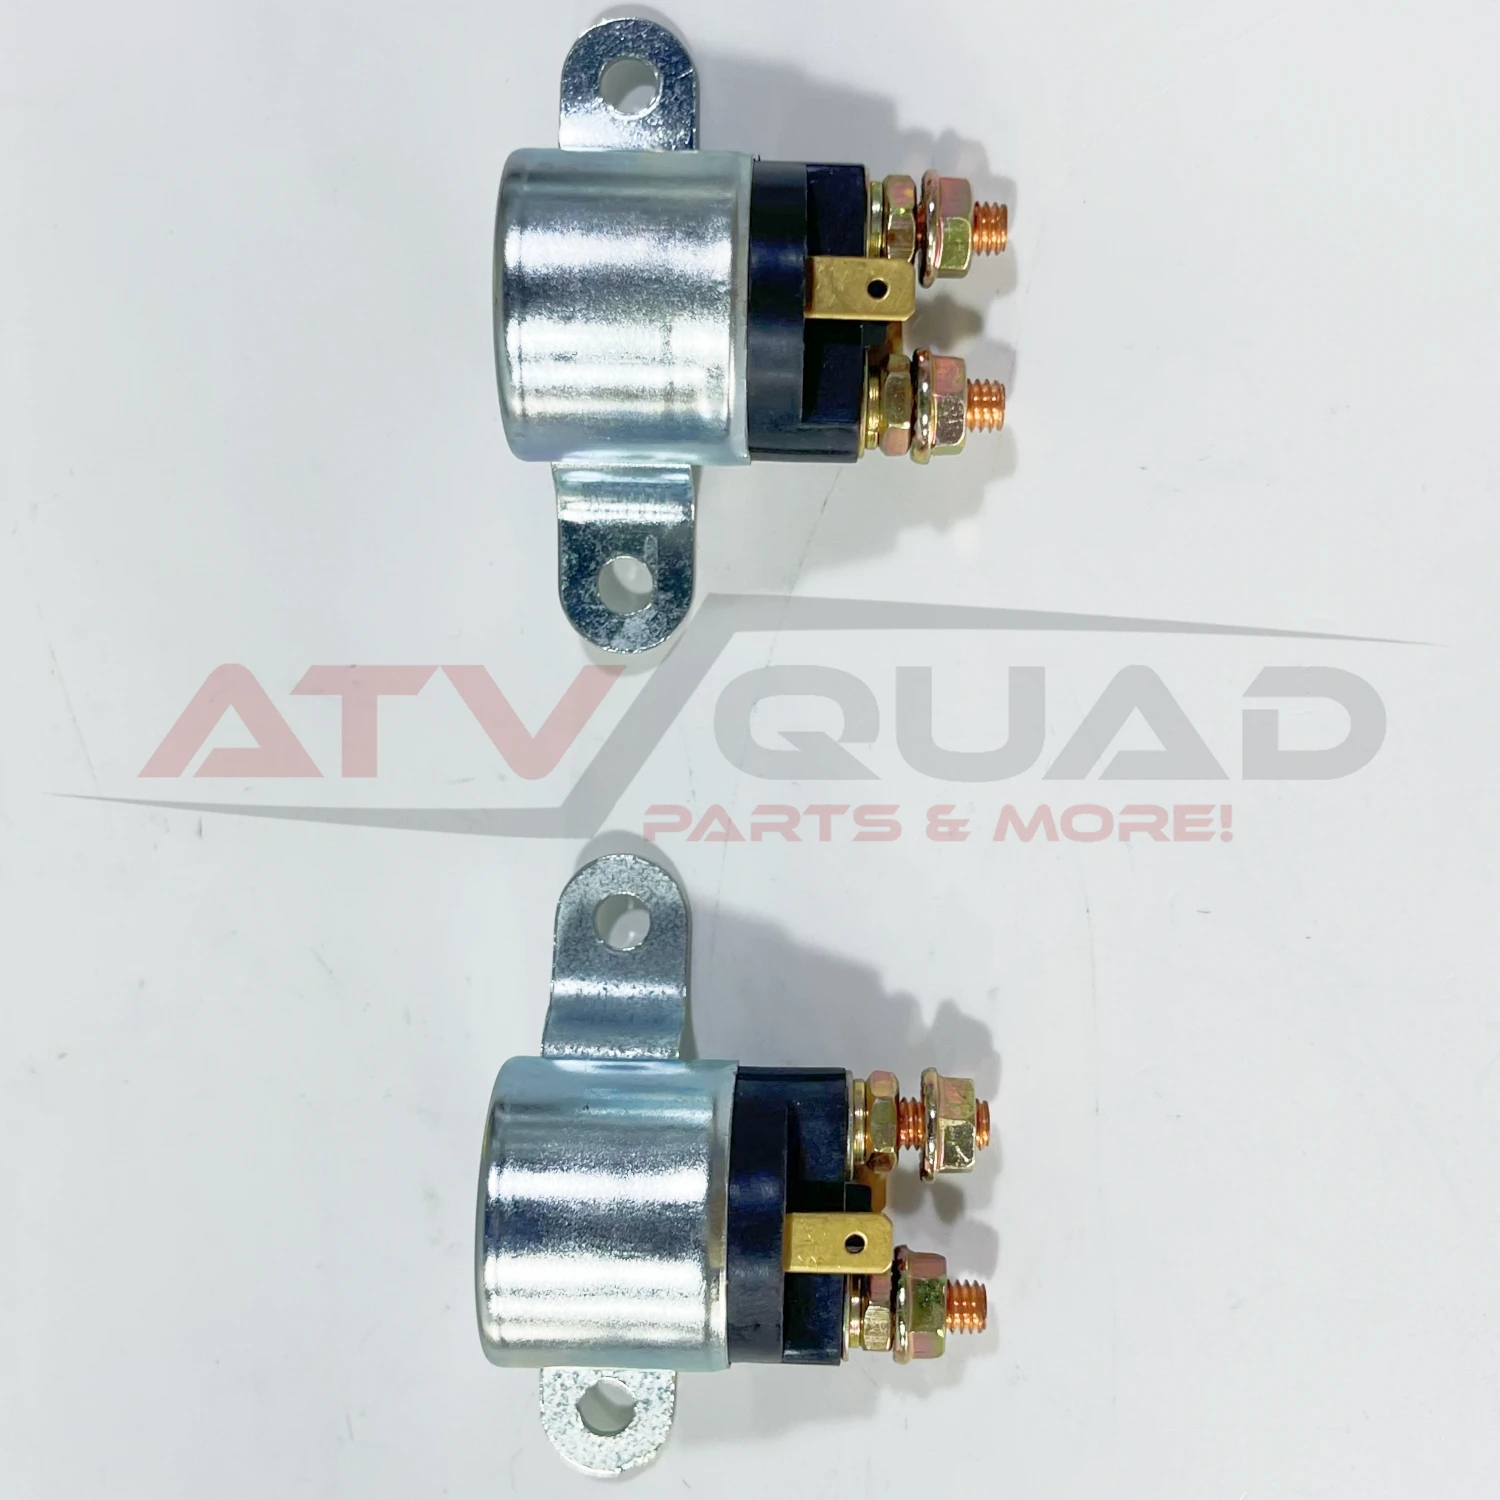 2PCS Solenoid Relay for Can-am Outlander Renegade 400 450 500 570 650 800 850 1000 Bombardier Traxter 500 DS650 Spyder GS 990 2pcs starter solenoid relay switch for can am outlander renegade 400 450 500 570 650 800 850 1000 710007777 710001364 710000252